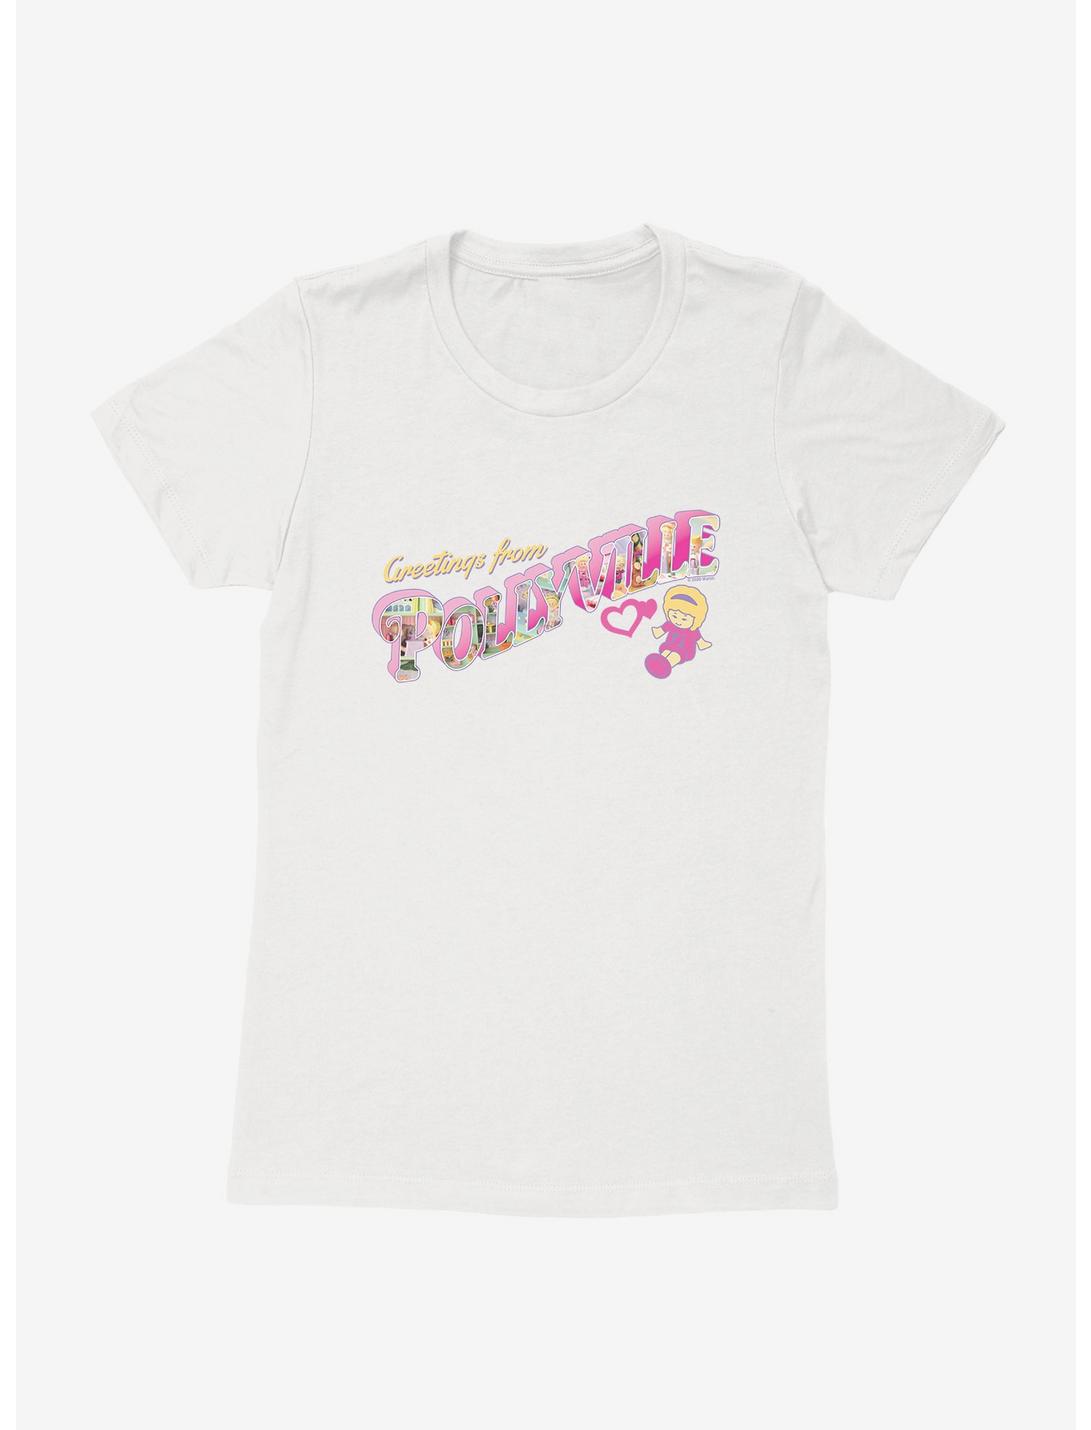 Polly Pocket Greetings From Pollyville Womens T-Shirt, WHITE, hi-res